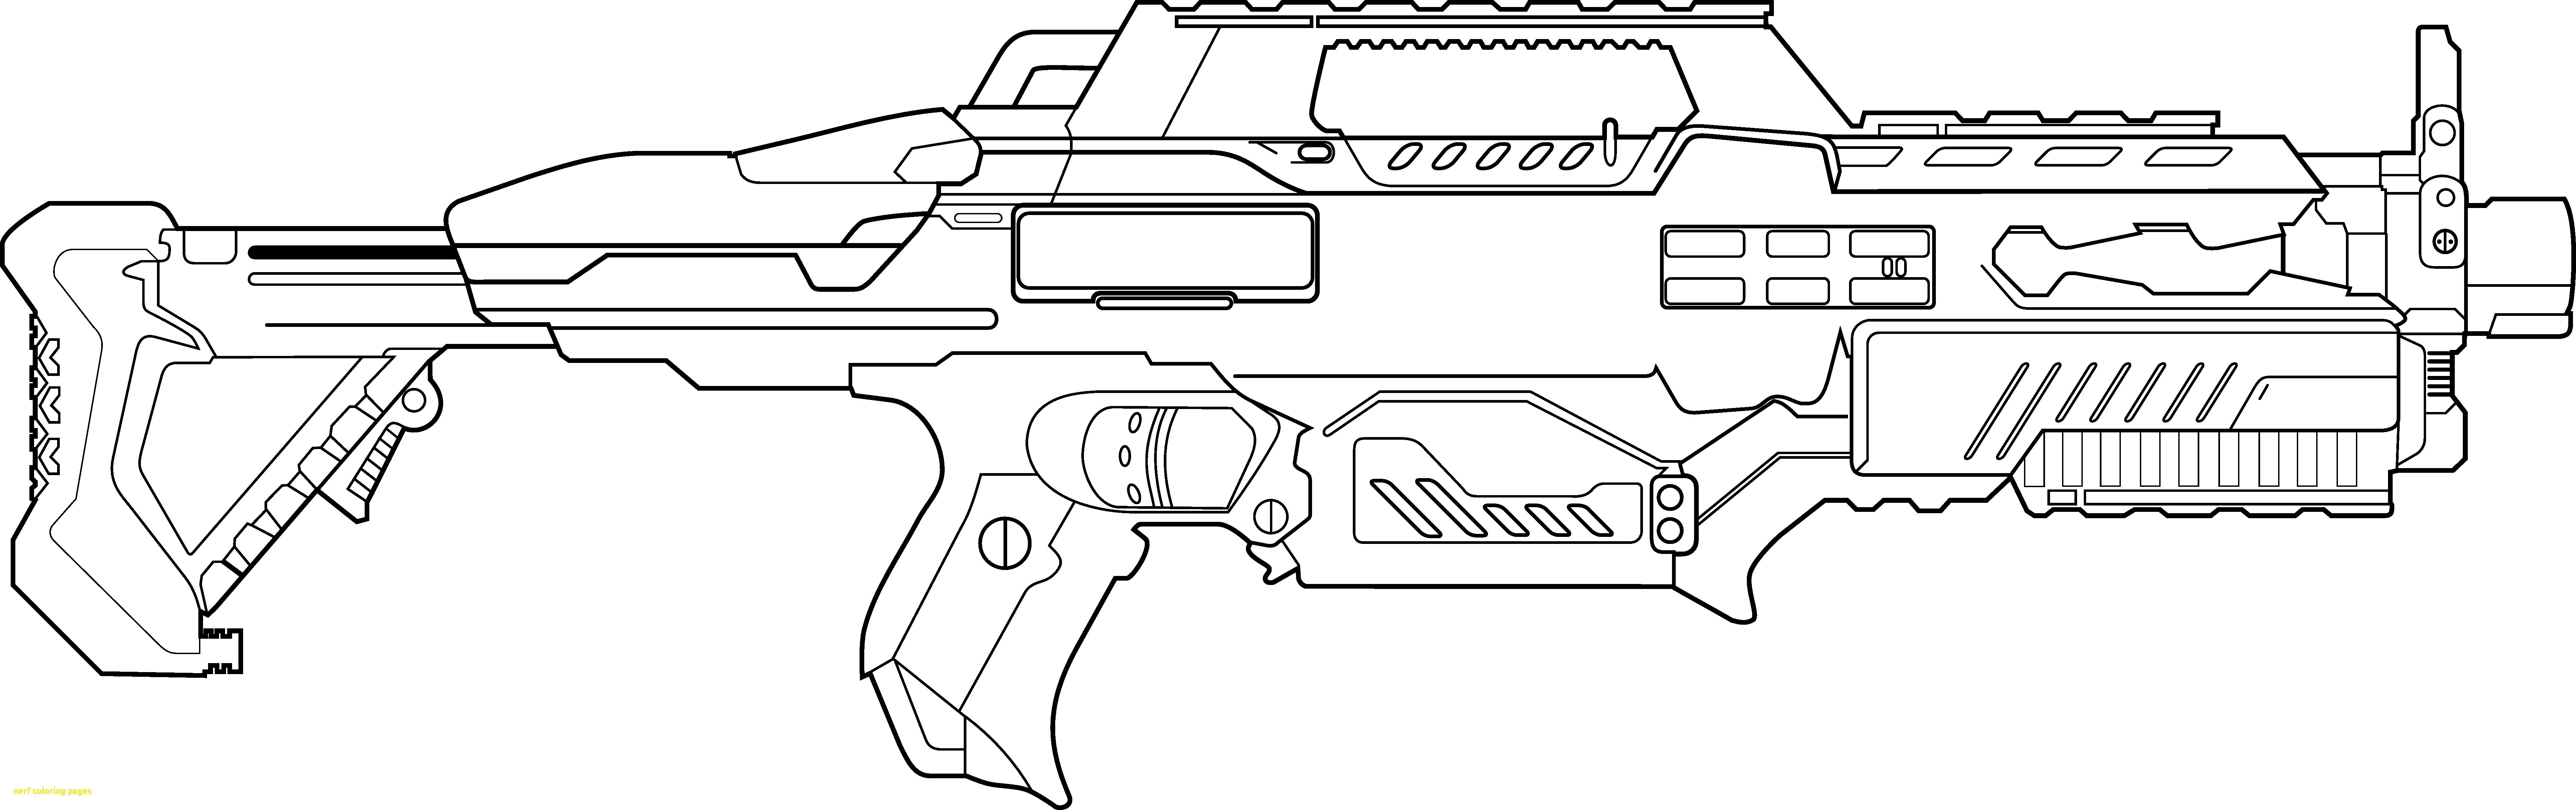 Nerf Gun Coloring Pages
 Coloring Nerf Gun Pages with Book Kids Fun Art Sheets